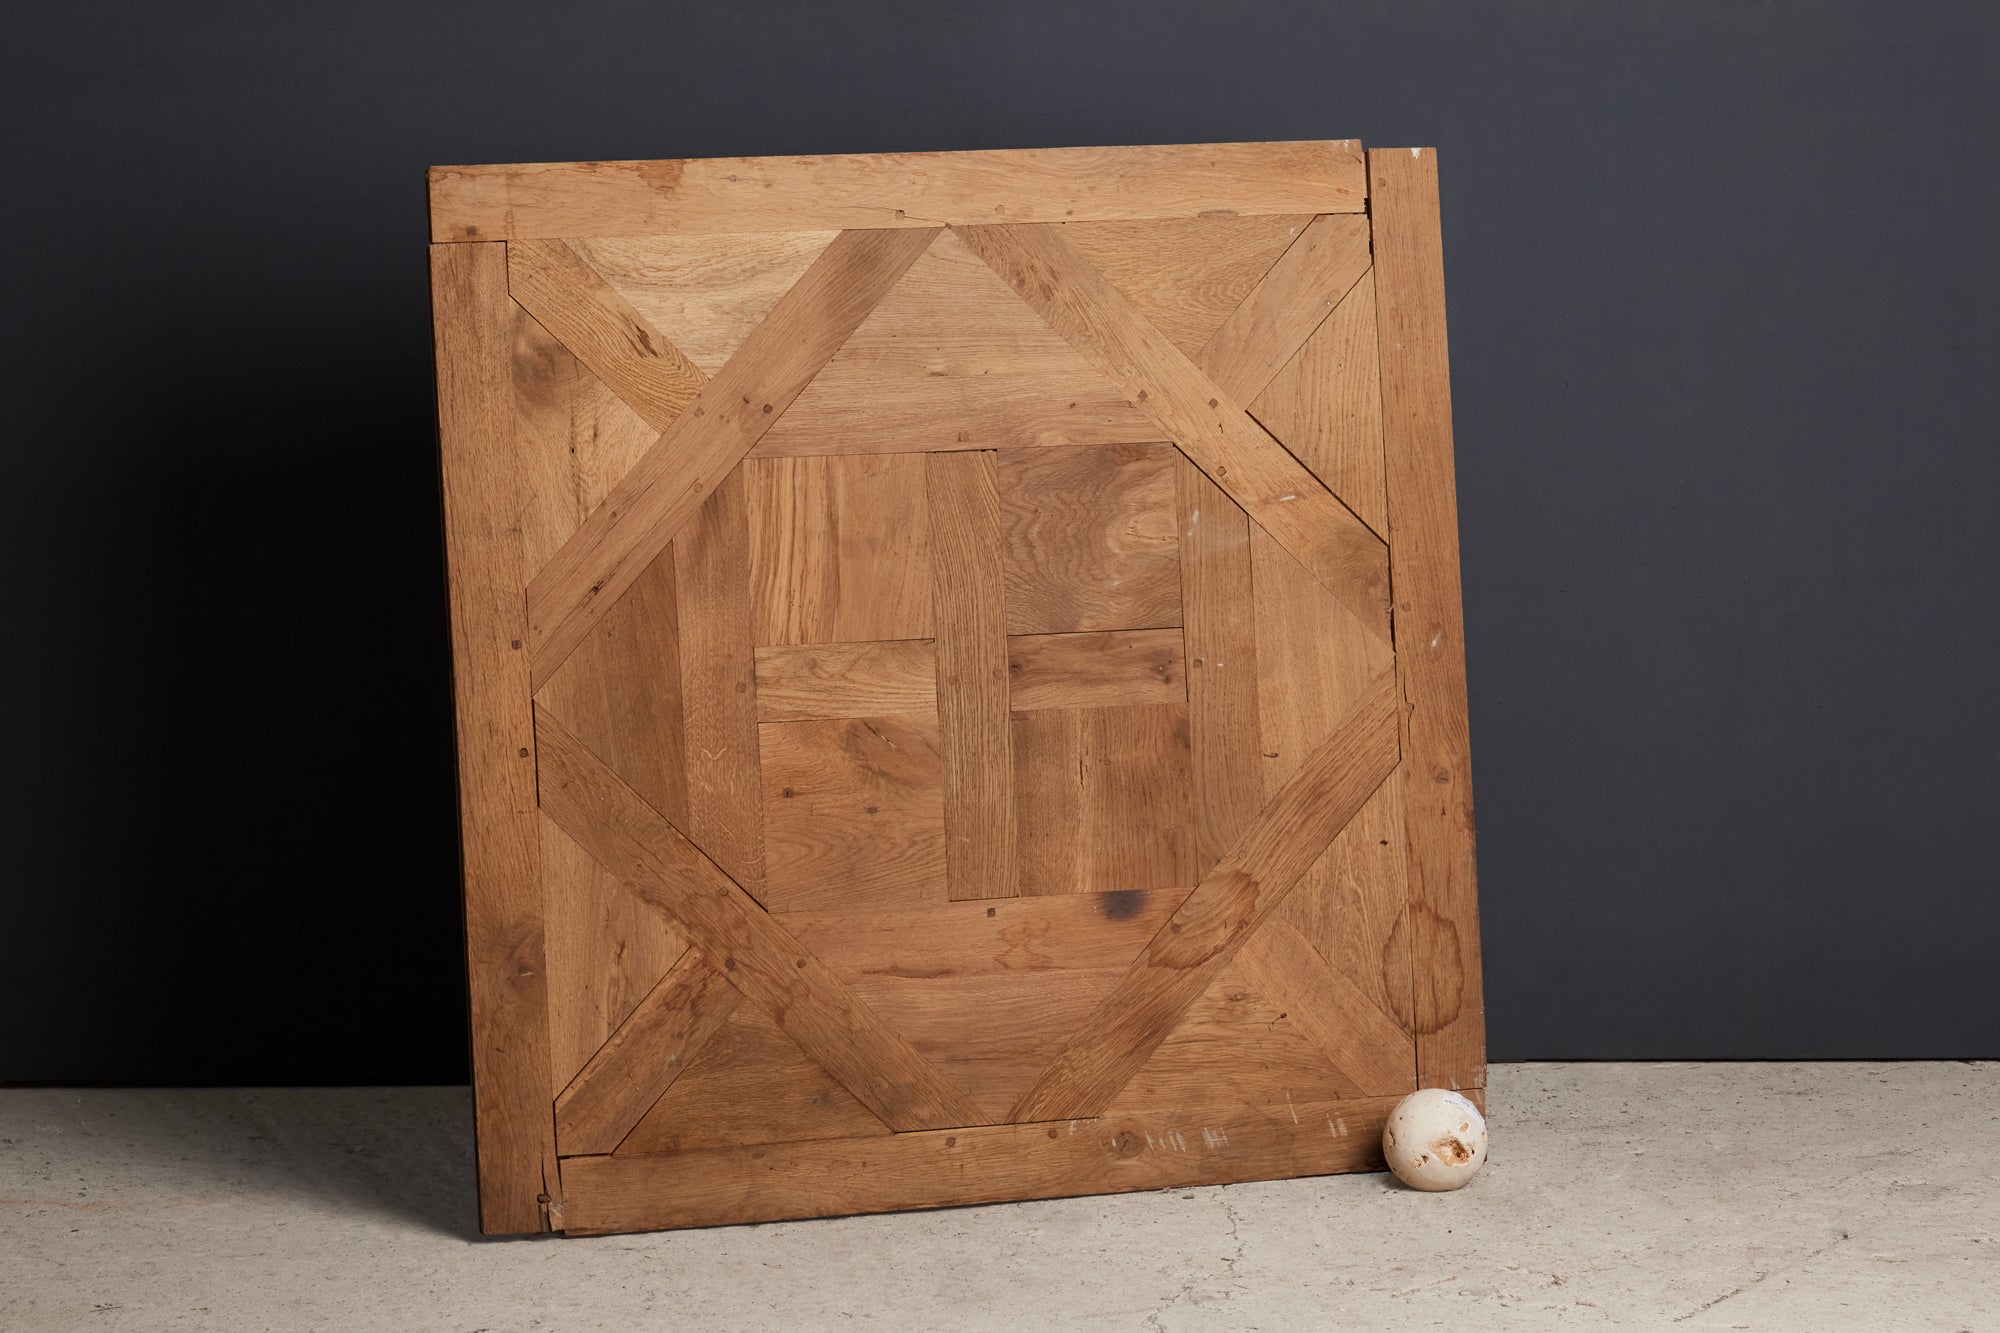 Hand Made Parquet de Chambord Panels from Reclaimed Wood